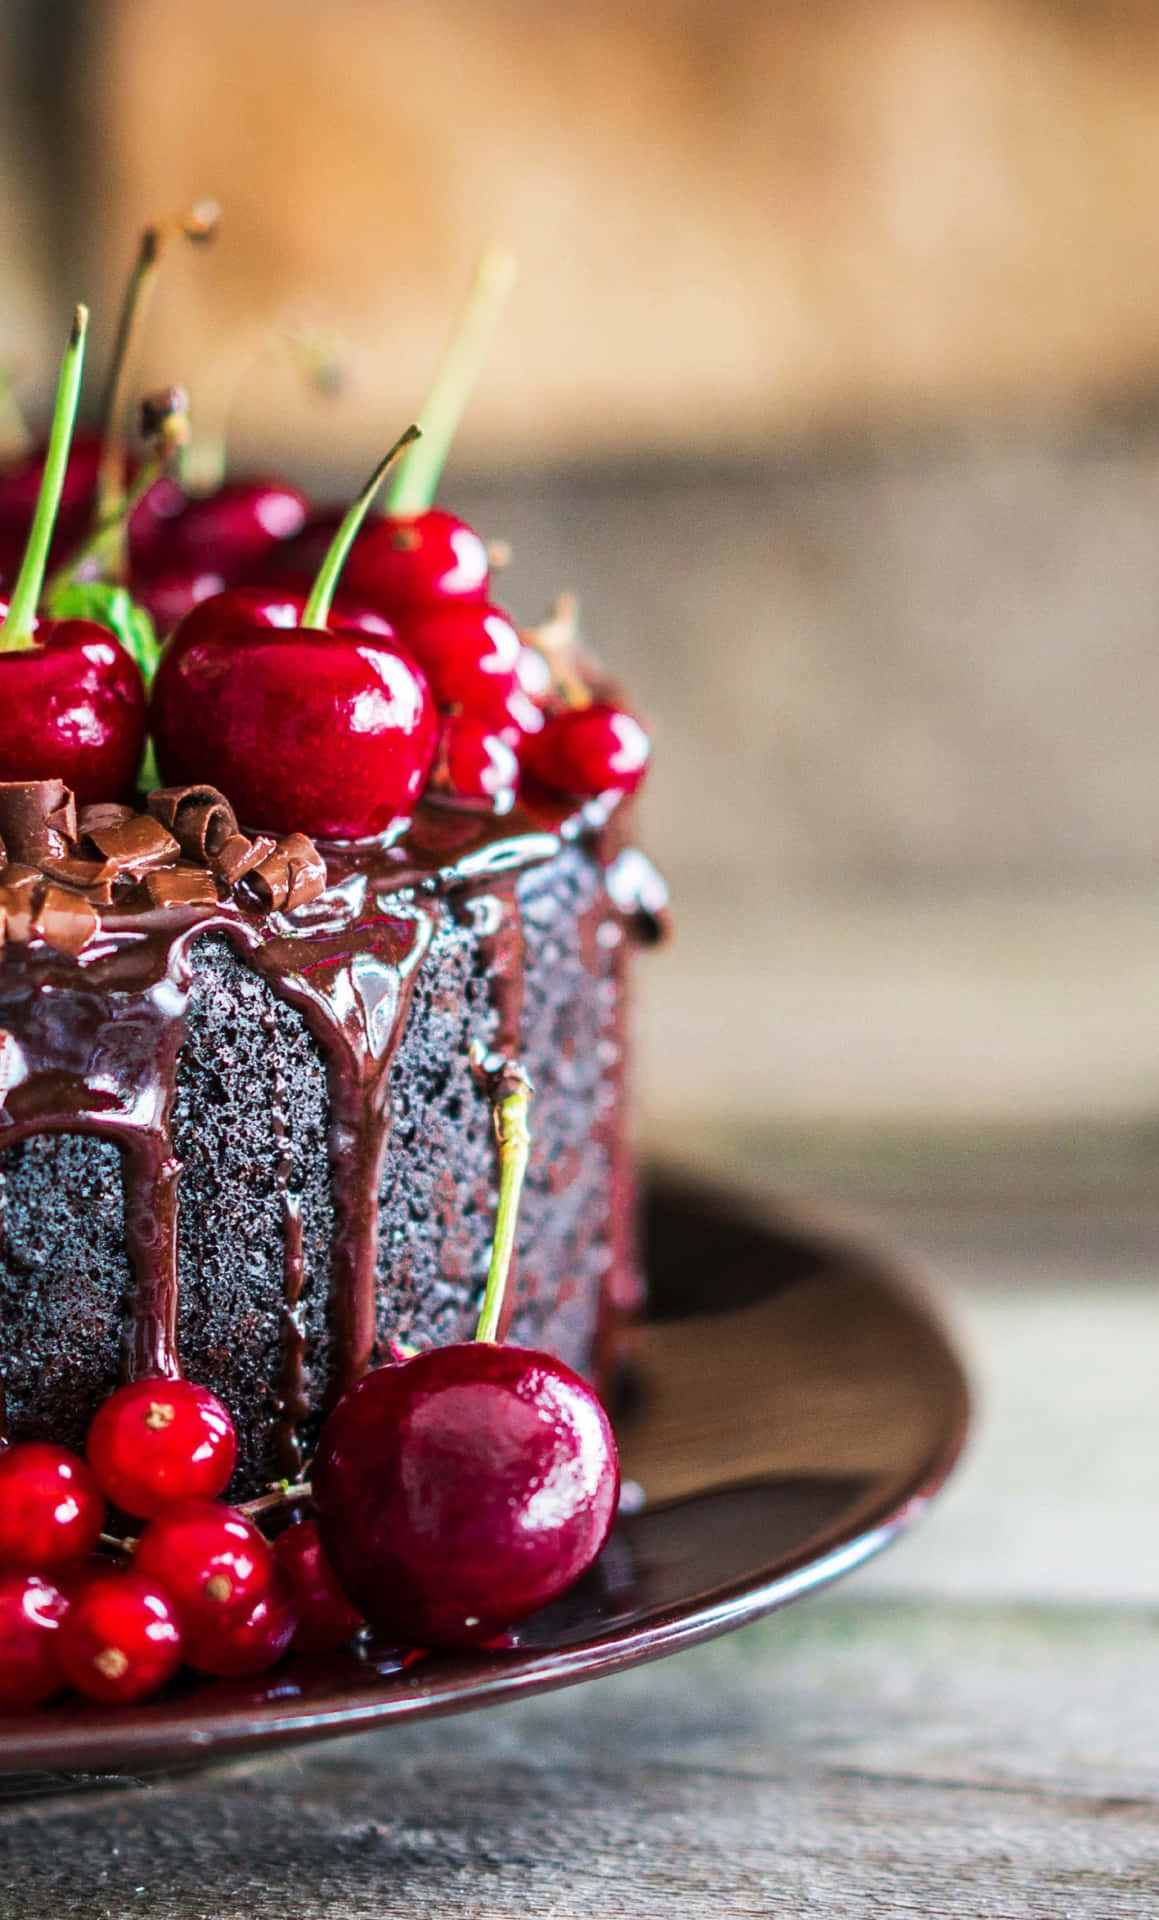 A Chocolate Cake With Cherries On Top Wallpaper